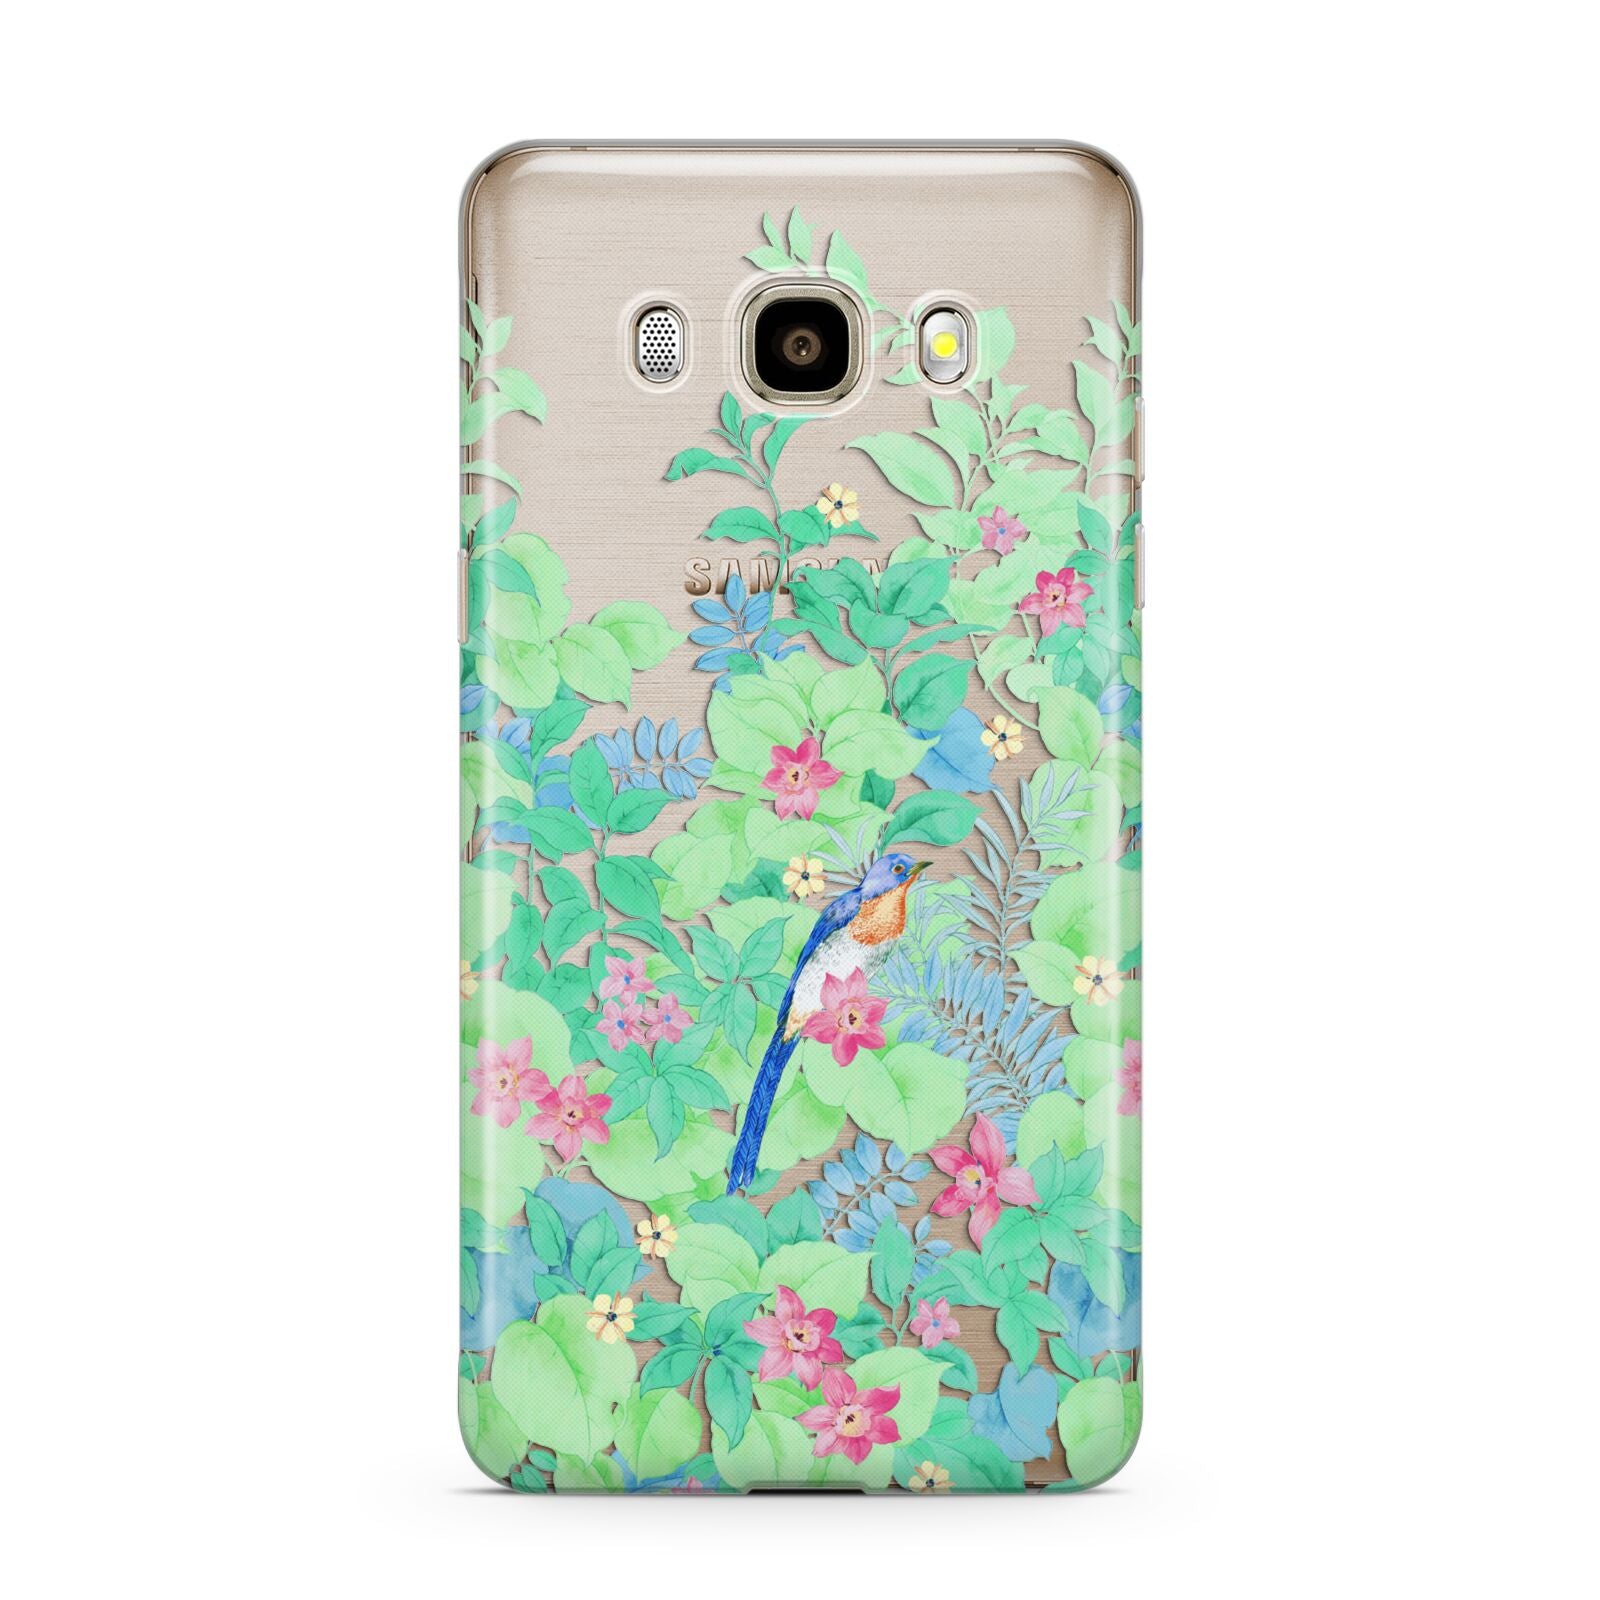 Watercolour Floral Samsung Galaxy J7 2016 Case on gold phone